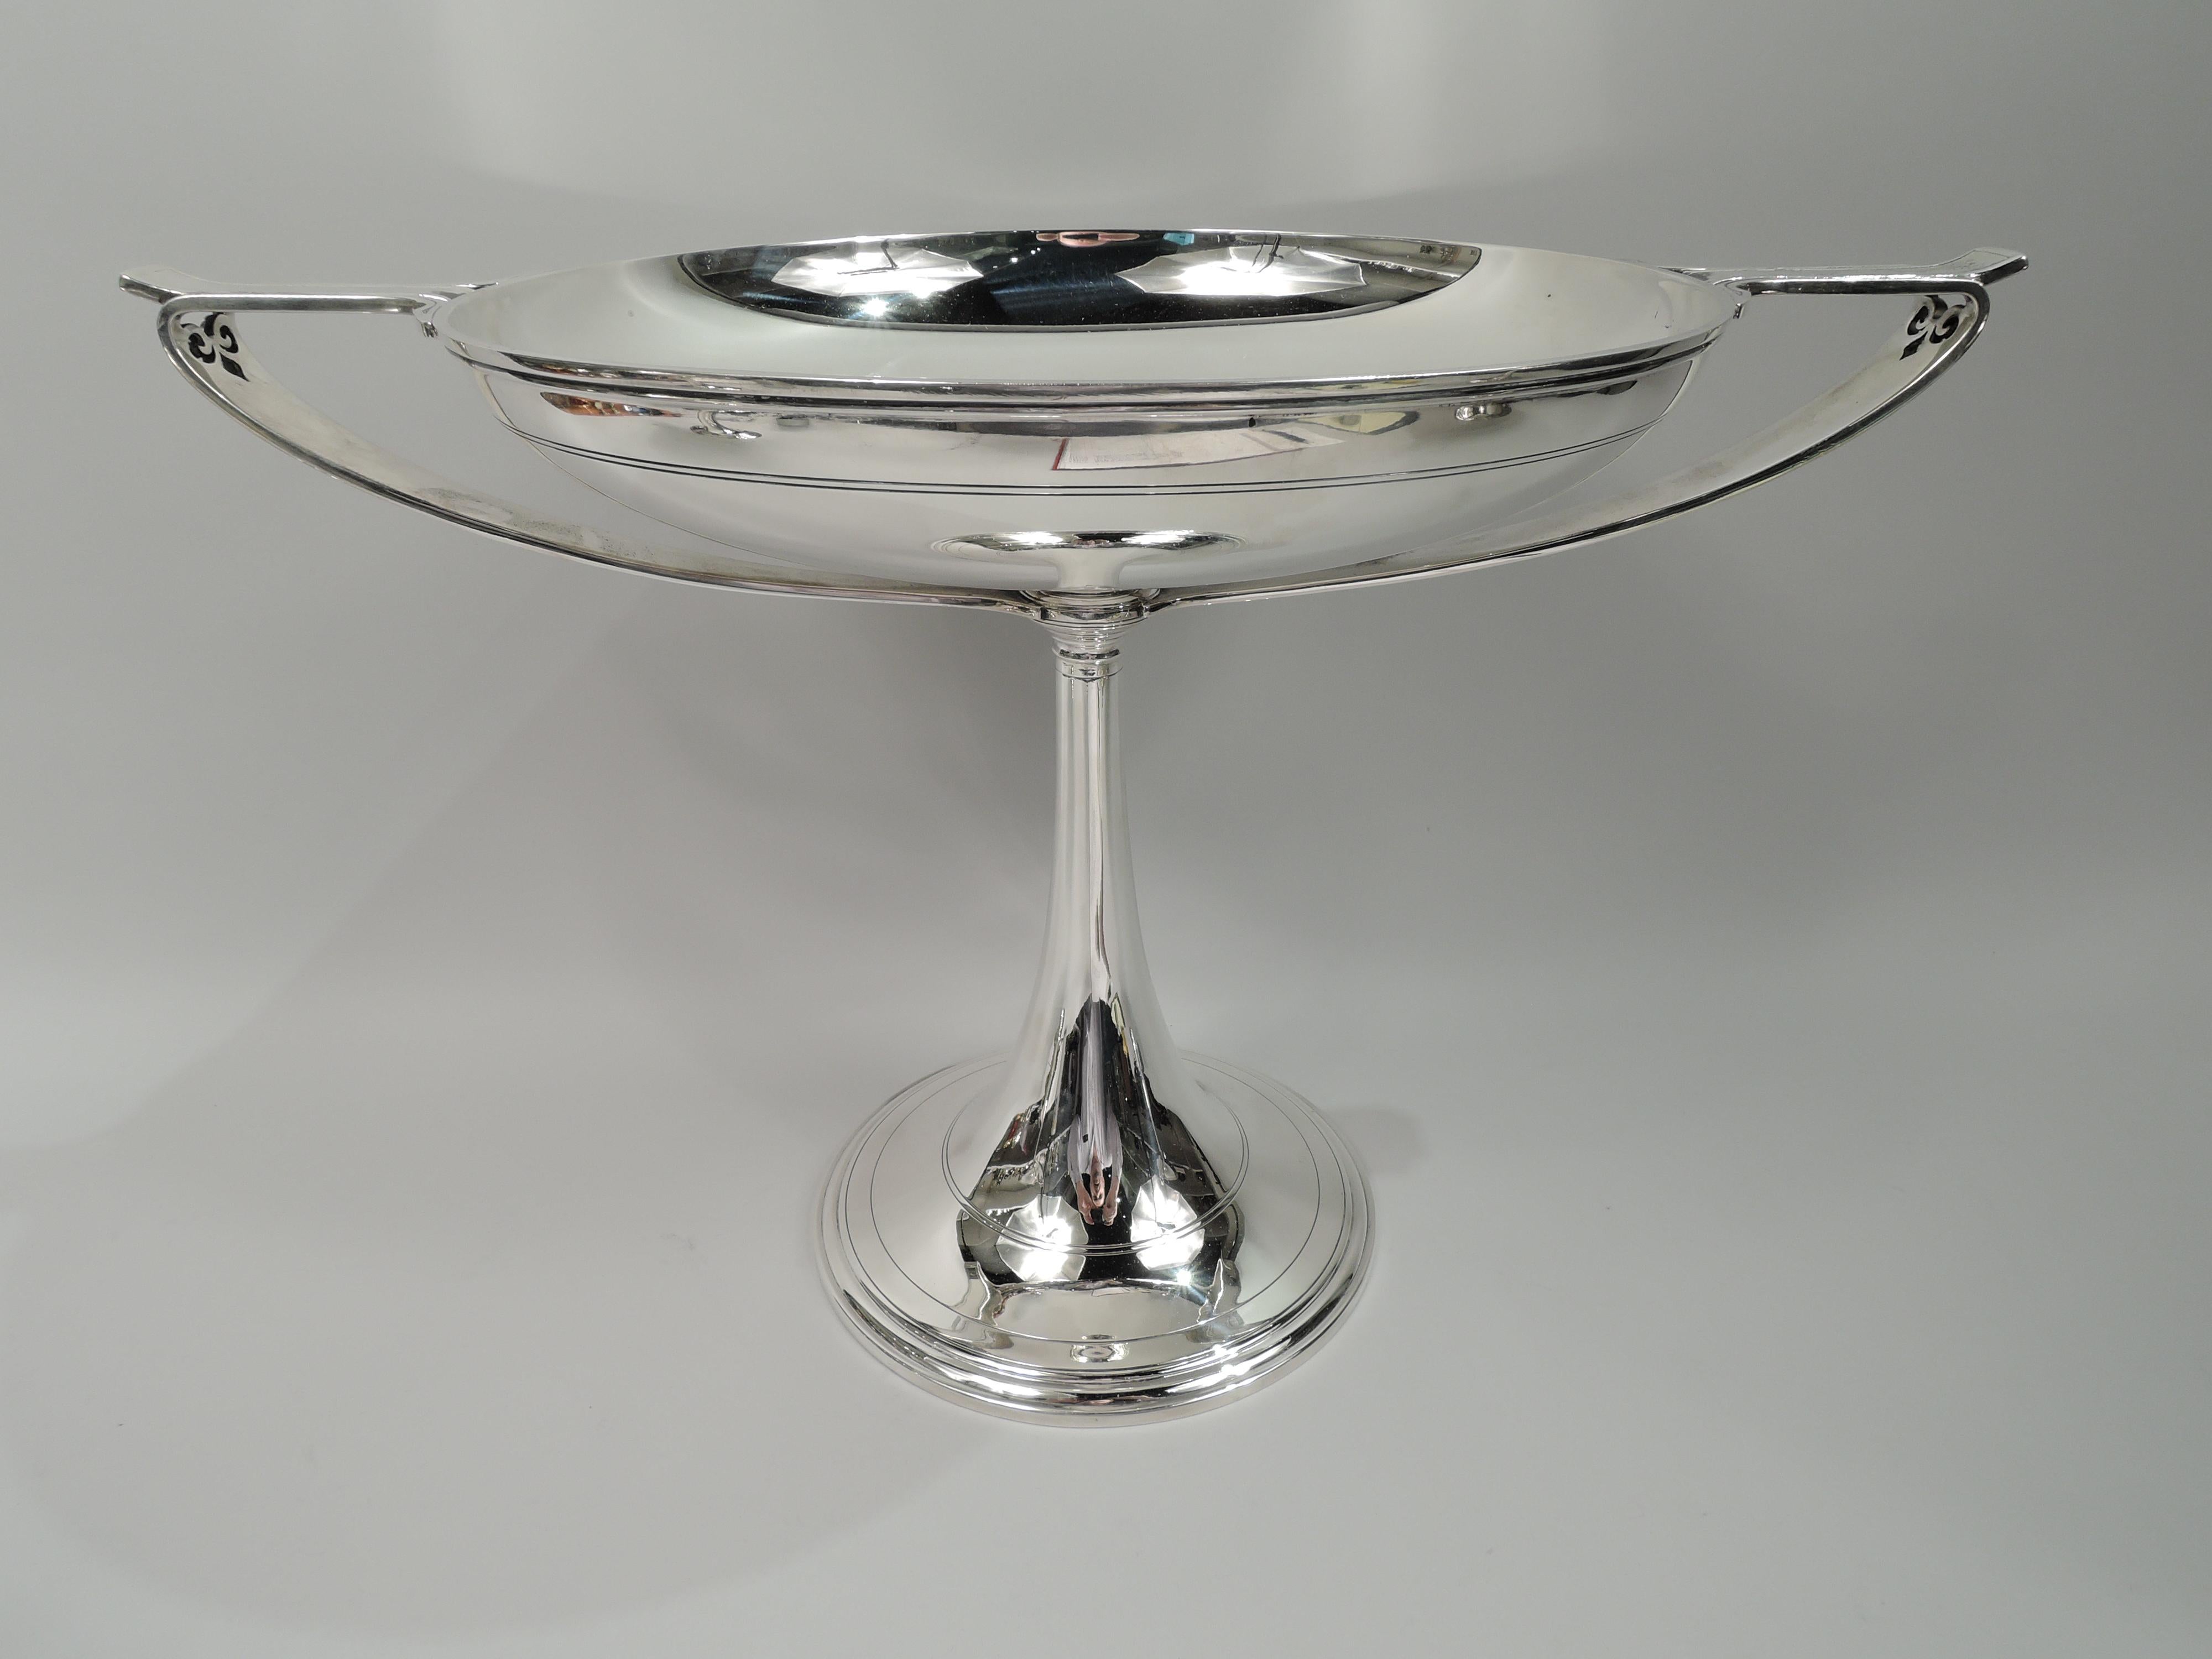 Rare Art Deco sterling silver 3-piece garniture, comprising one large and two small kylix-form bowls. Made by Tiffany & Co. in New York, ca 1920. Each: Round and shallow with stepped and knopped conical support. Sides handles are horizontal and